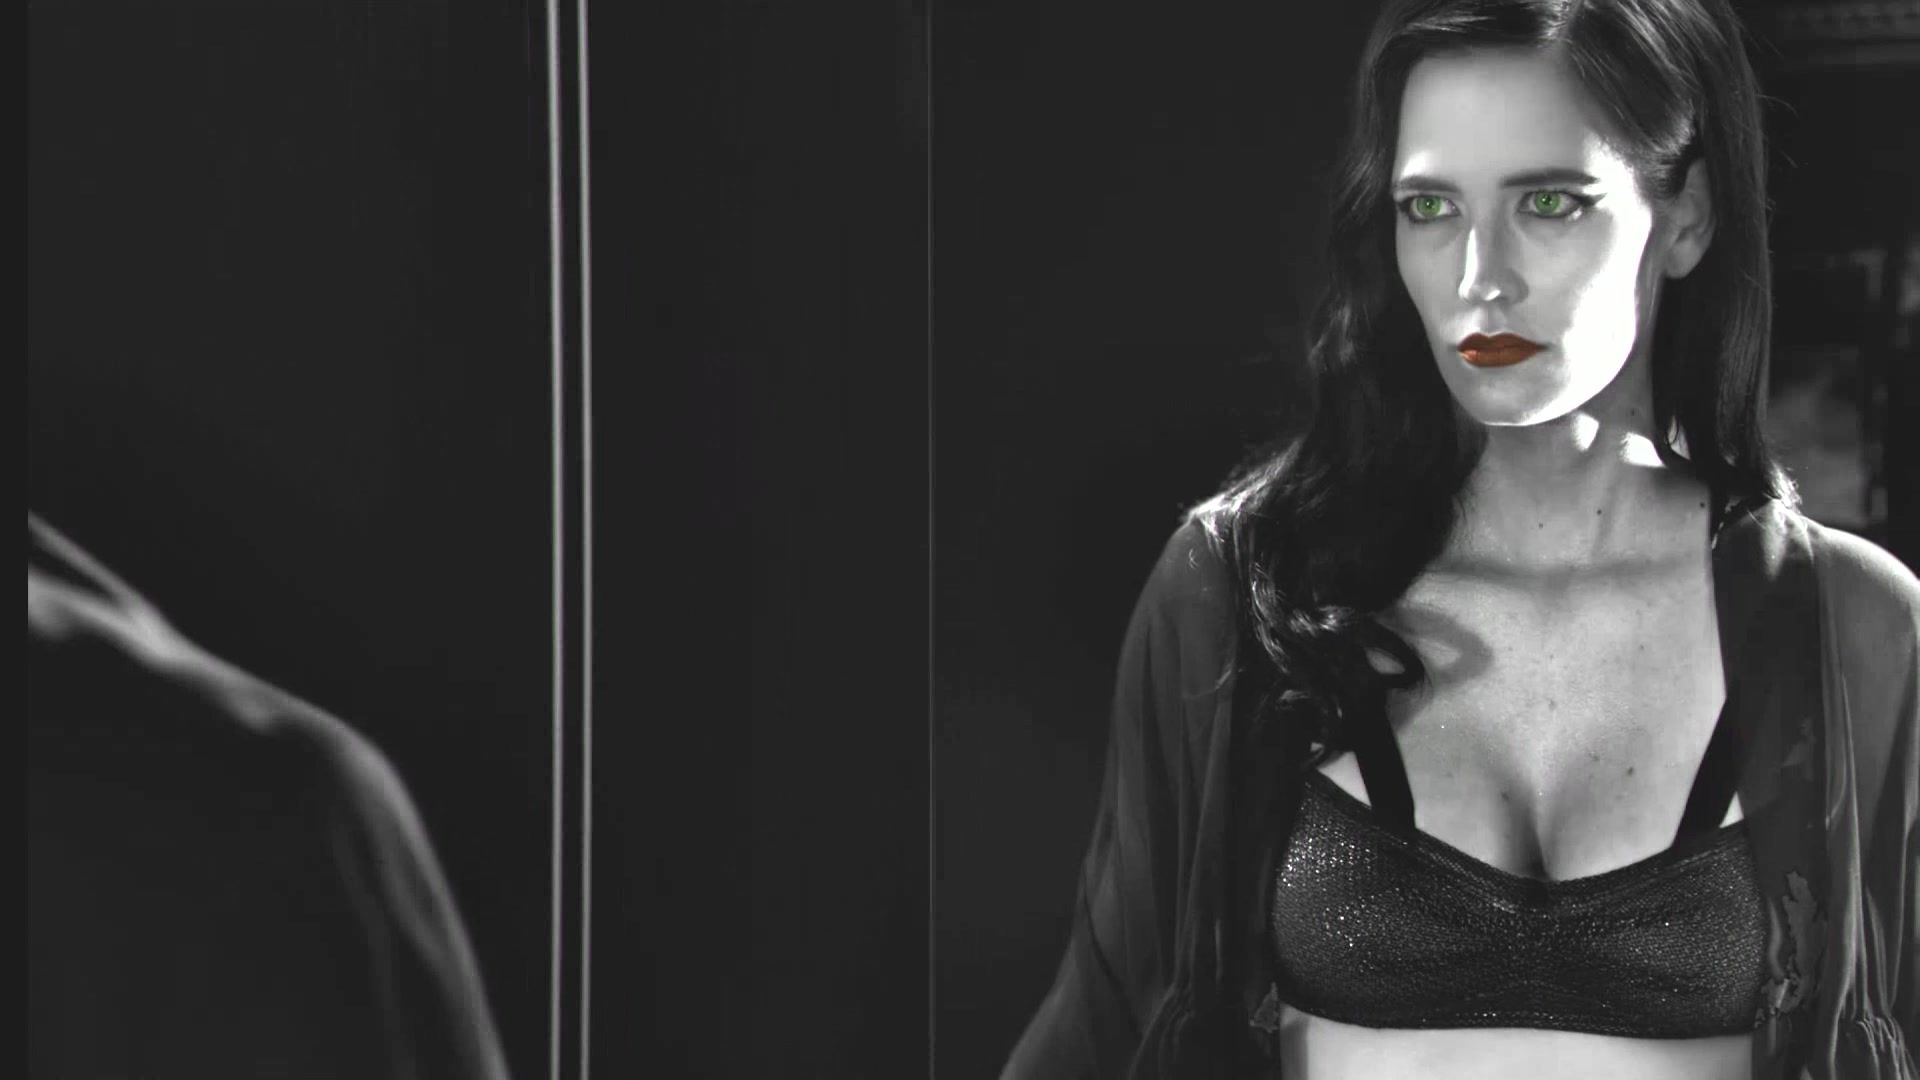 Les Eva Green - Sin City 2 - A Dame To Kill For (2014) Full HD 1080 BR (Sex, Nude, FF) Transsexual